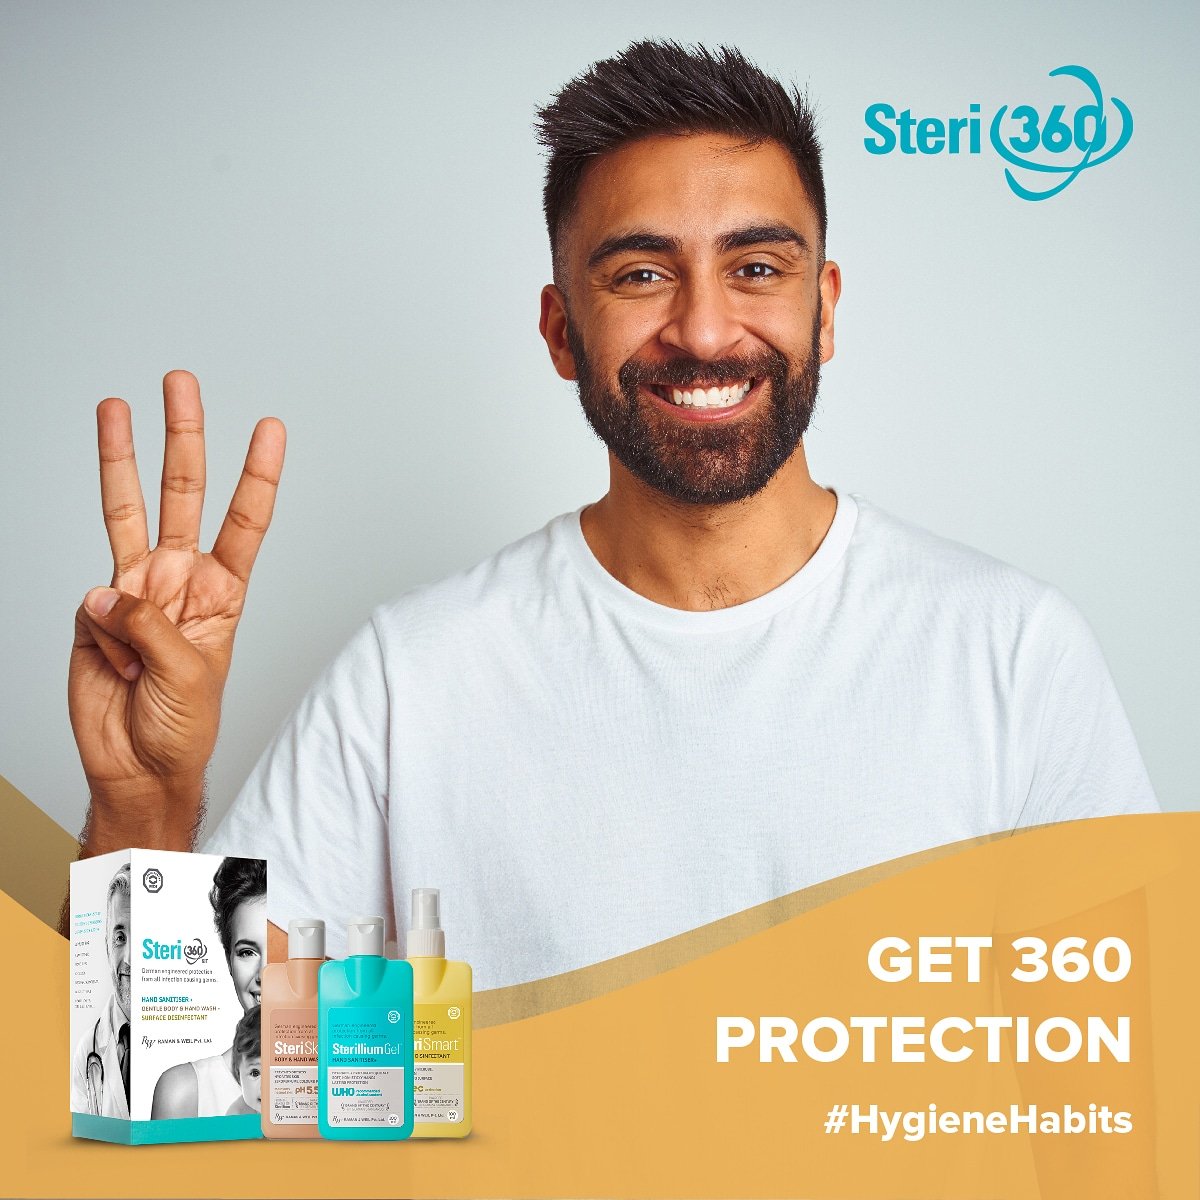 Wash, cleanse and disinfect. 
The 3 products in the Steri 360 kit -  Sterillium Gel, SteriSmart Surface Disinfectant and Steriskin Body & Hand. These are your solutions for all round protection.

#unlockyourcity #hygienehabits #care #Wash #Disinfect #Handwash #360Protection